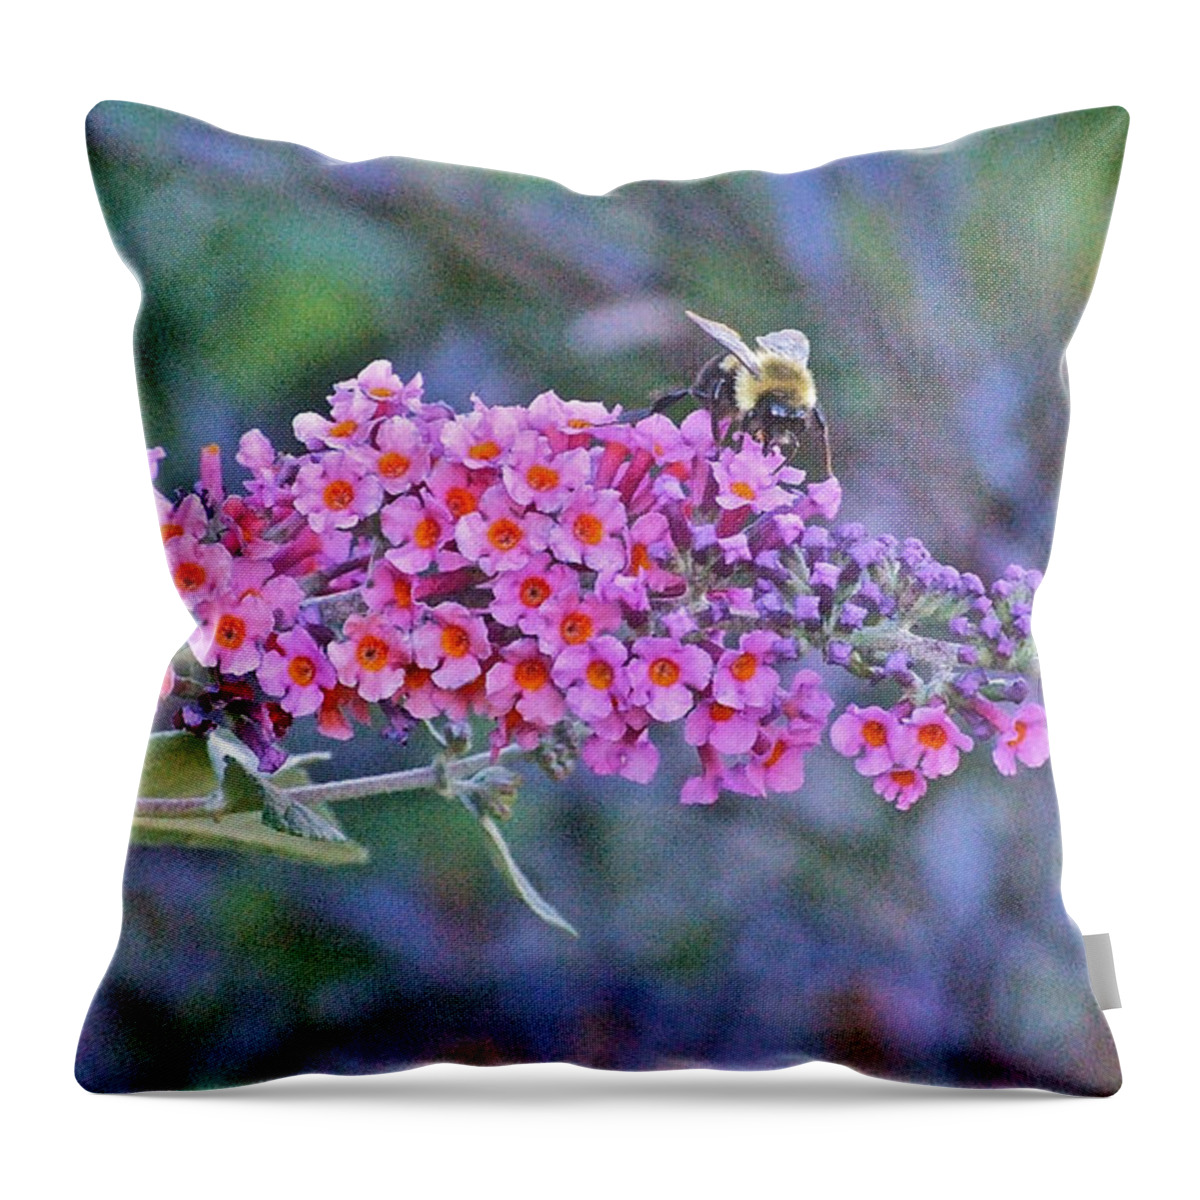 Bumble Bee Throw Pillow featuring the photograph Bee at Brunch by Janis Senungetuk